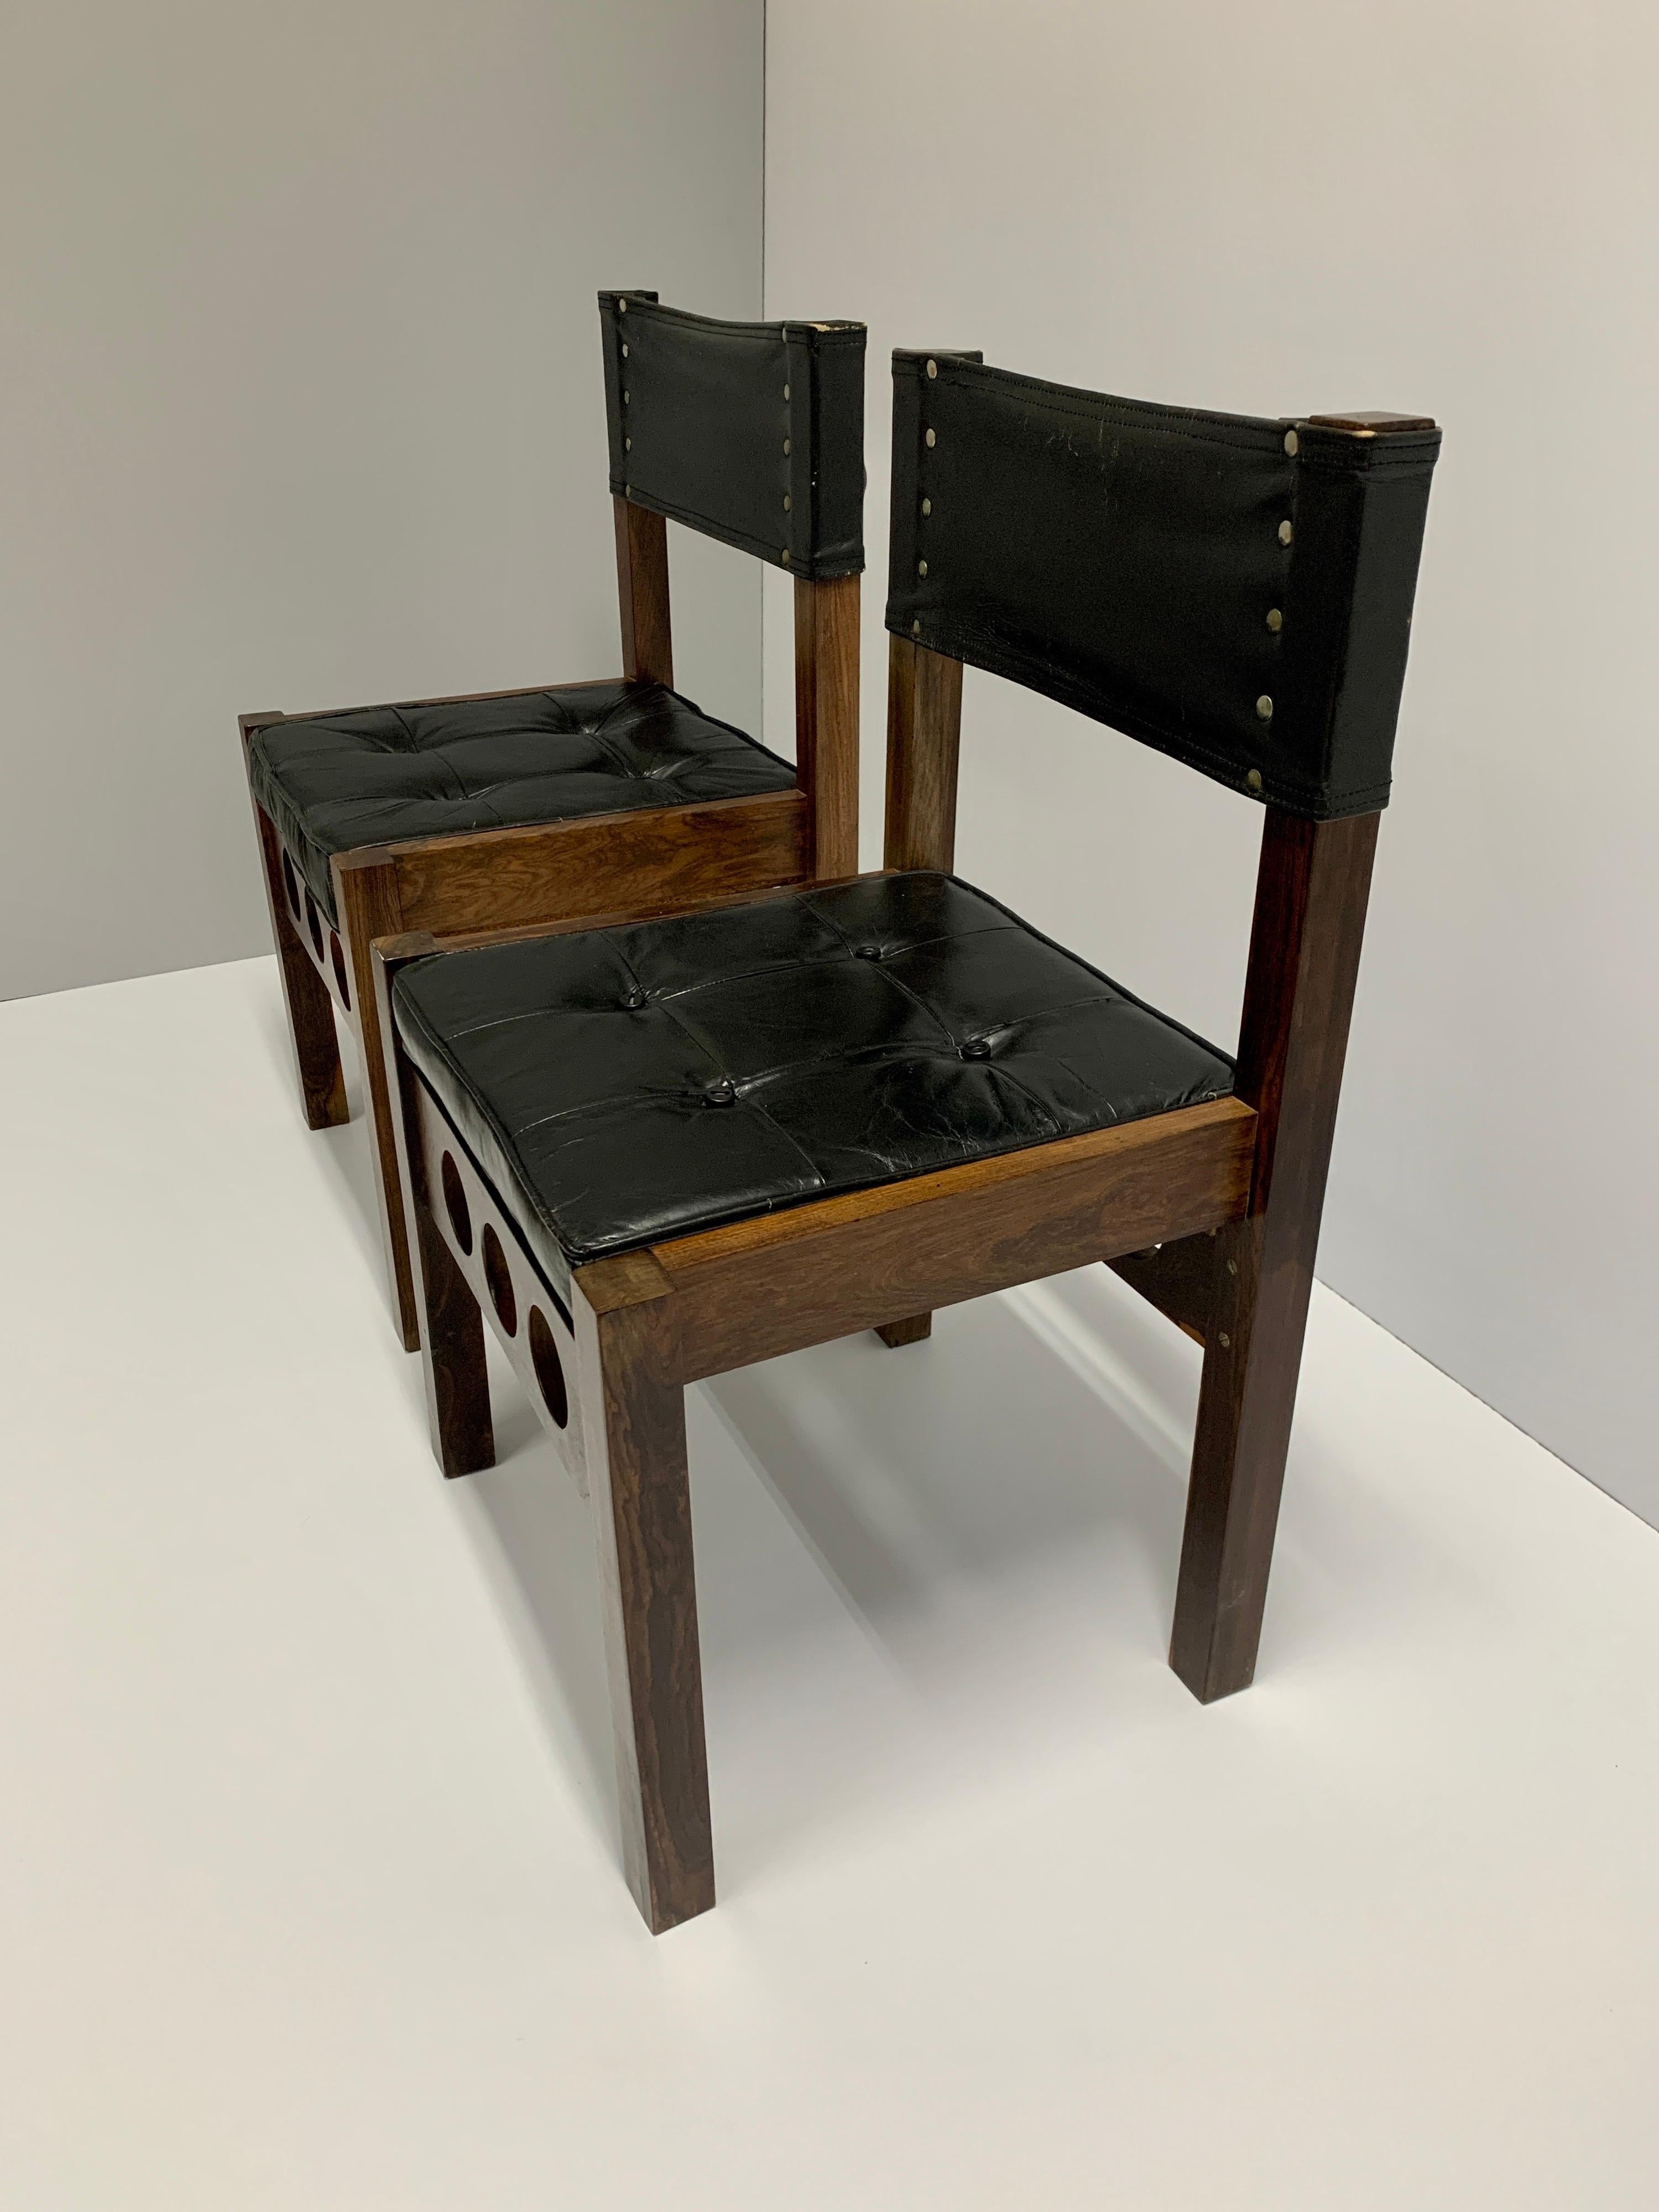 Pair of Don Shoemaker dining chairs (F84C), original leather on the seat and back, reversible seat and original buttons too.
Born in Nebraska, Don S. Shoemaker studied painting at The Fine Arts Institution of Chicago. In the late 1940s, he moved to